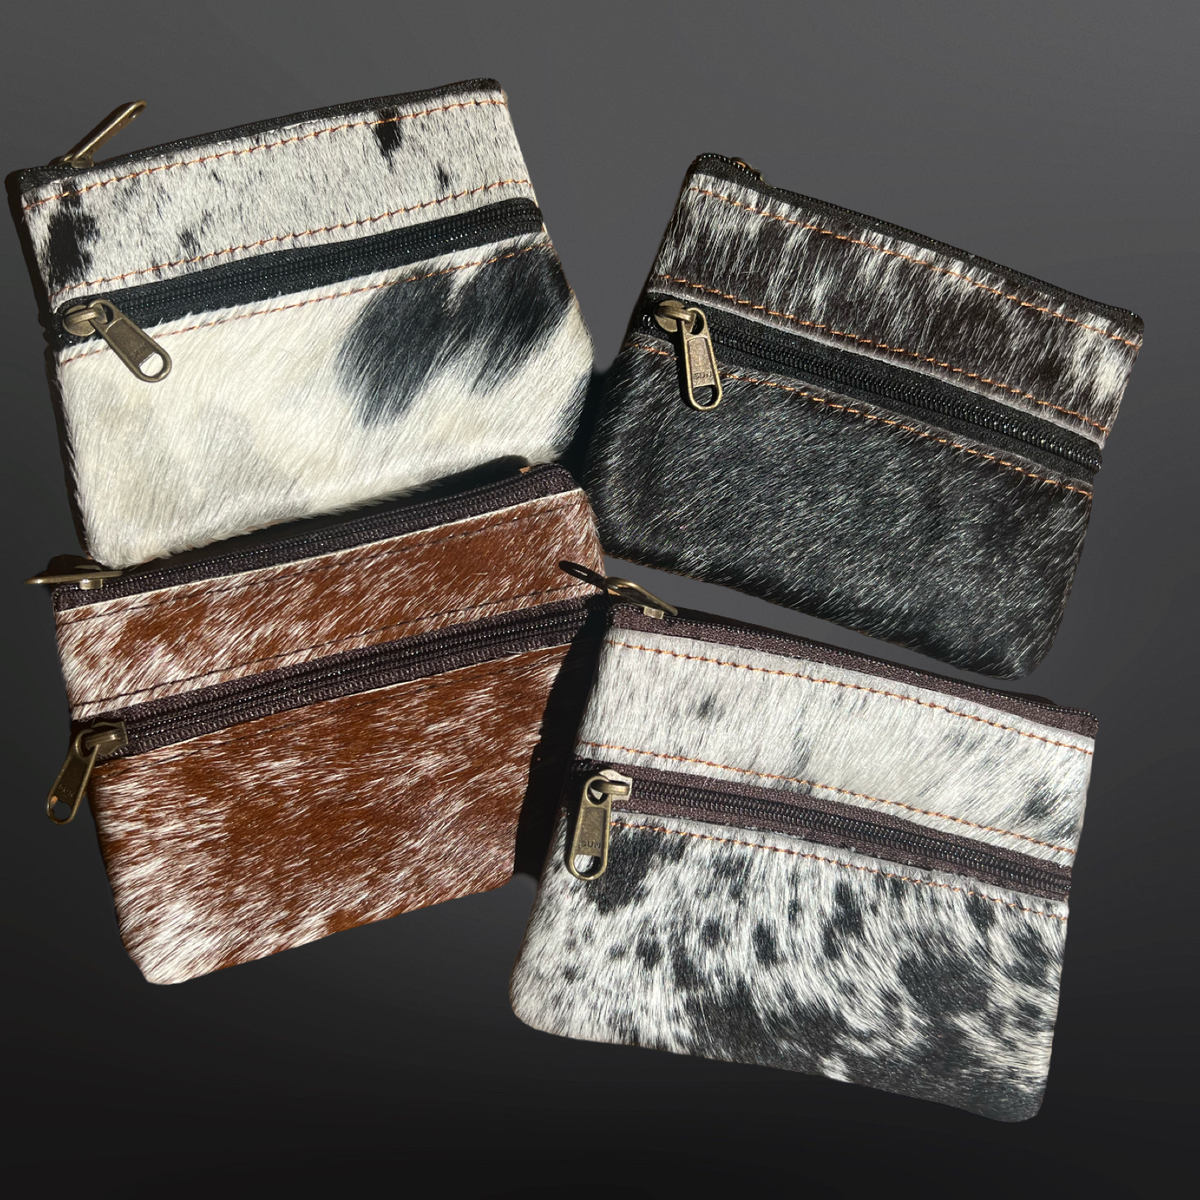 Cowhide Leather Coin Purse - 2 Pocket